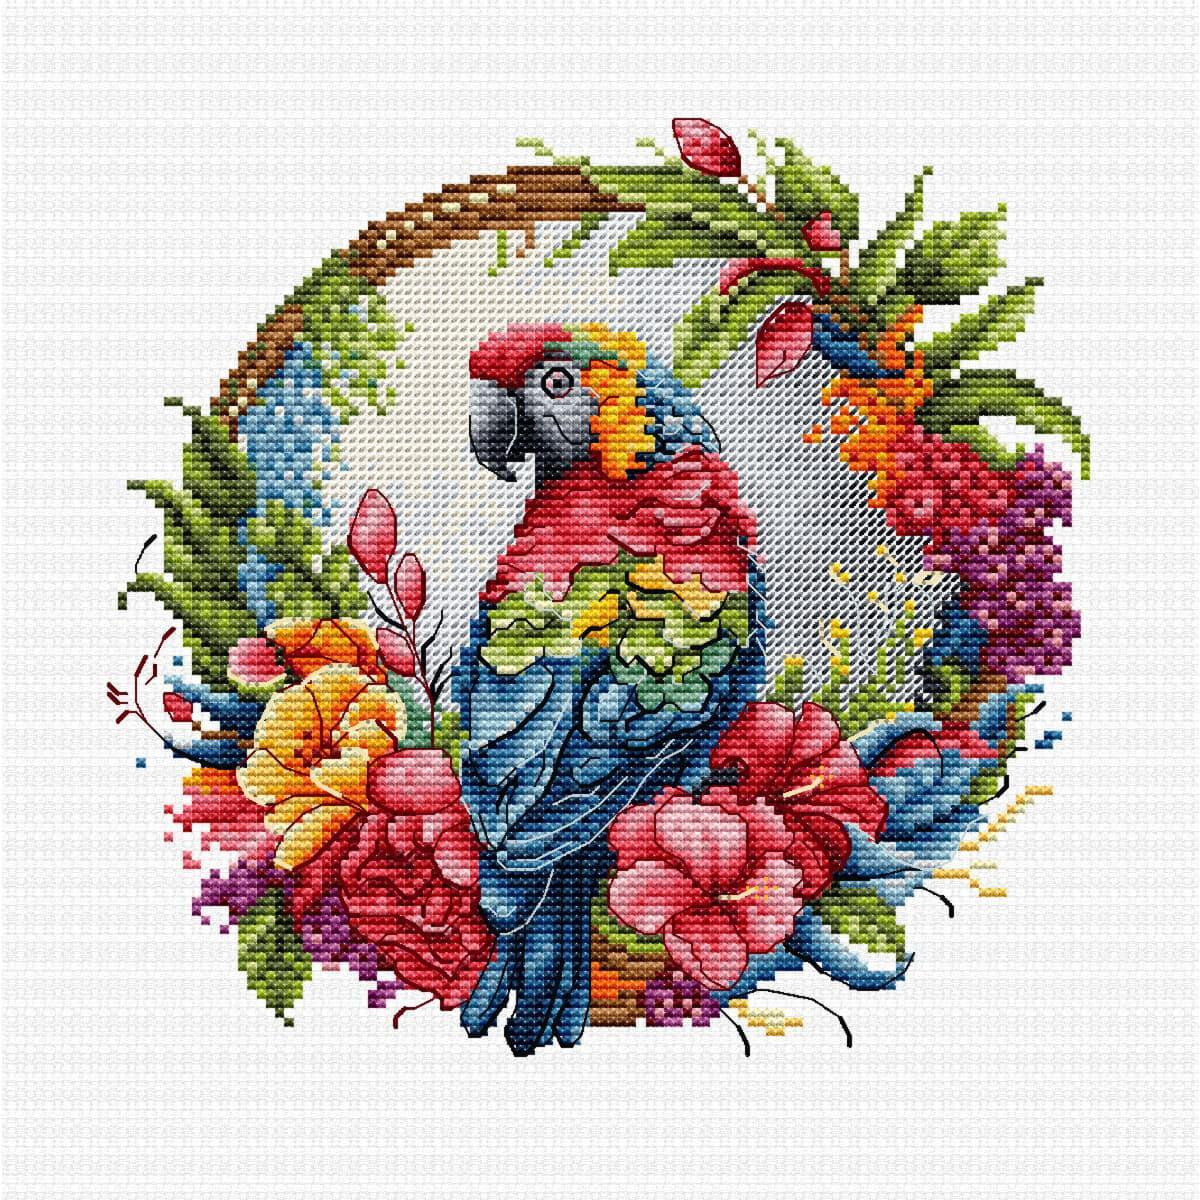 Elaborate cross-stitch embroidery of a colorful parrot...